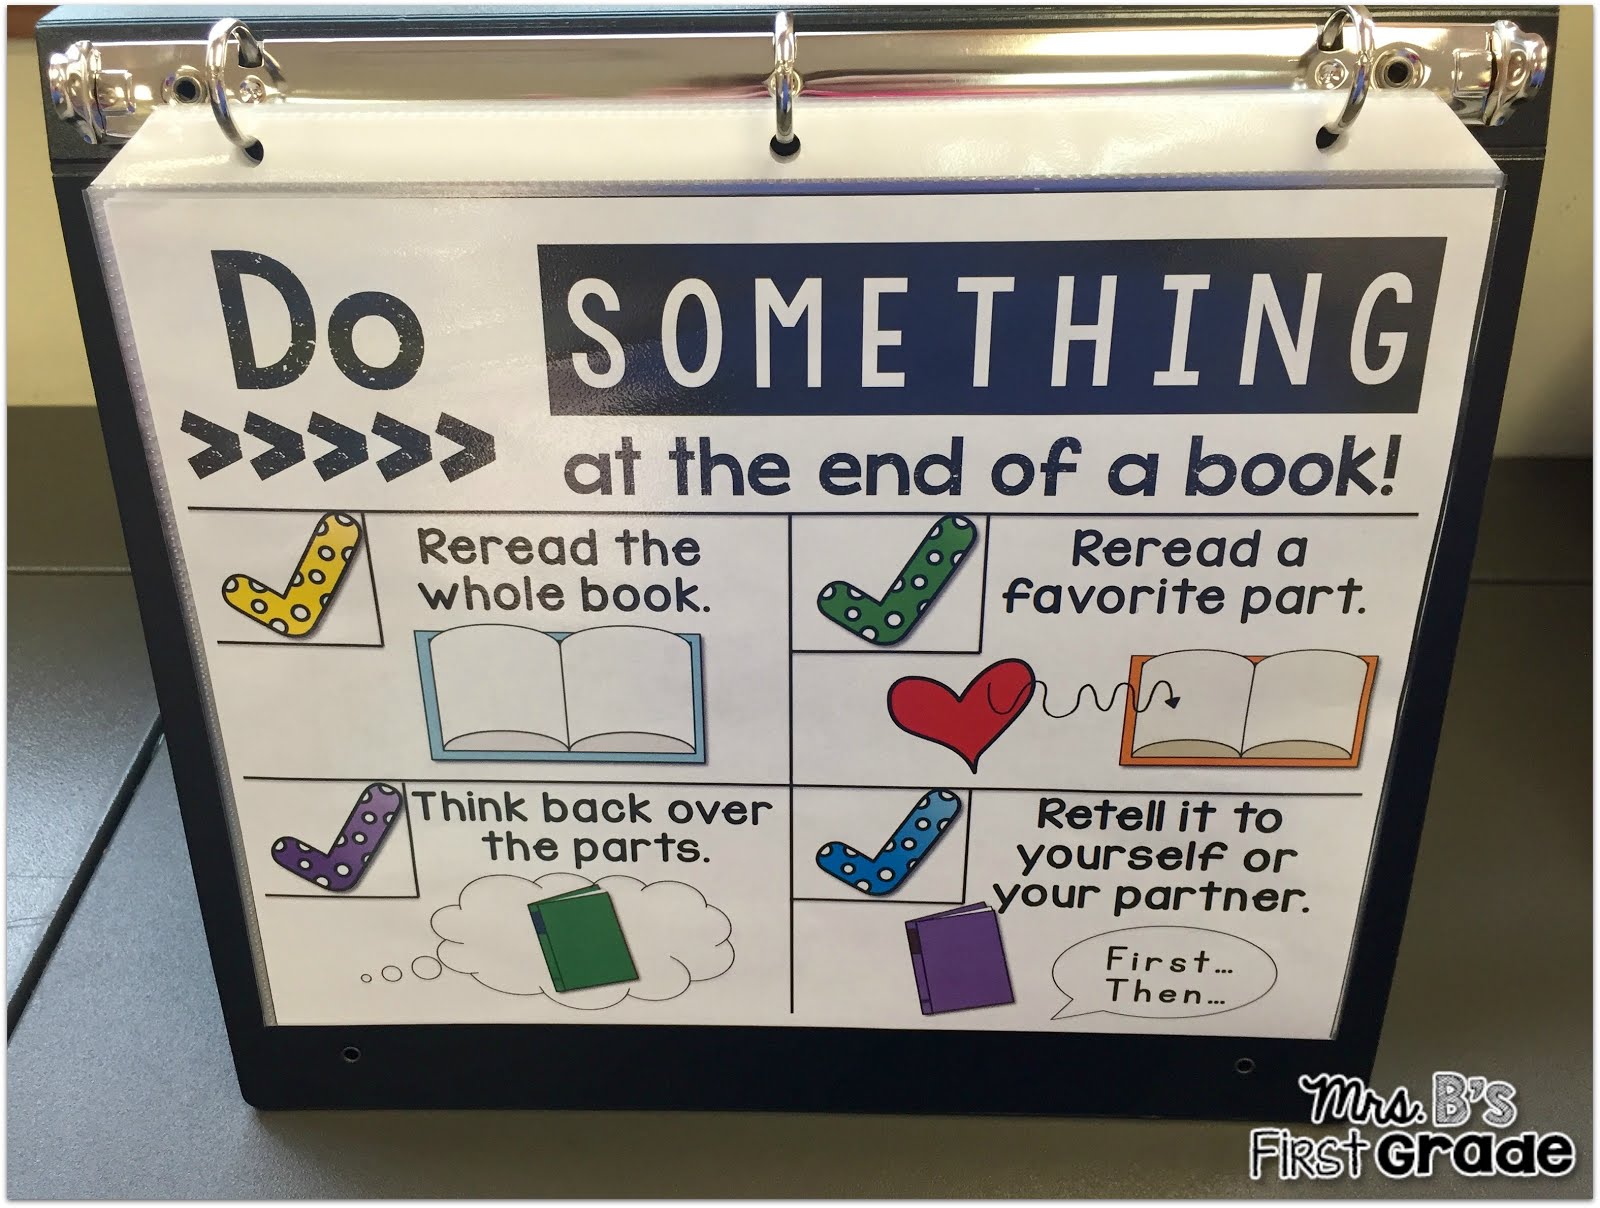 Literacy Loves Company: Are Anchor Charts Weighing You down?